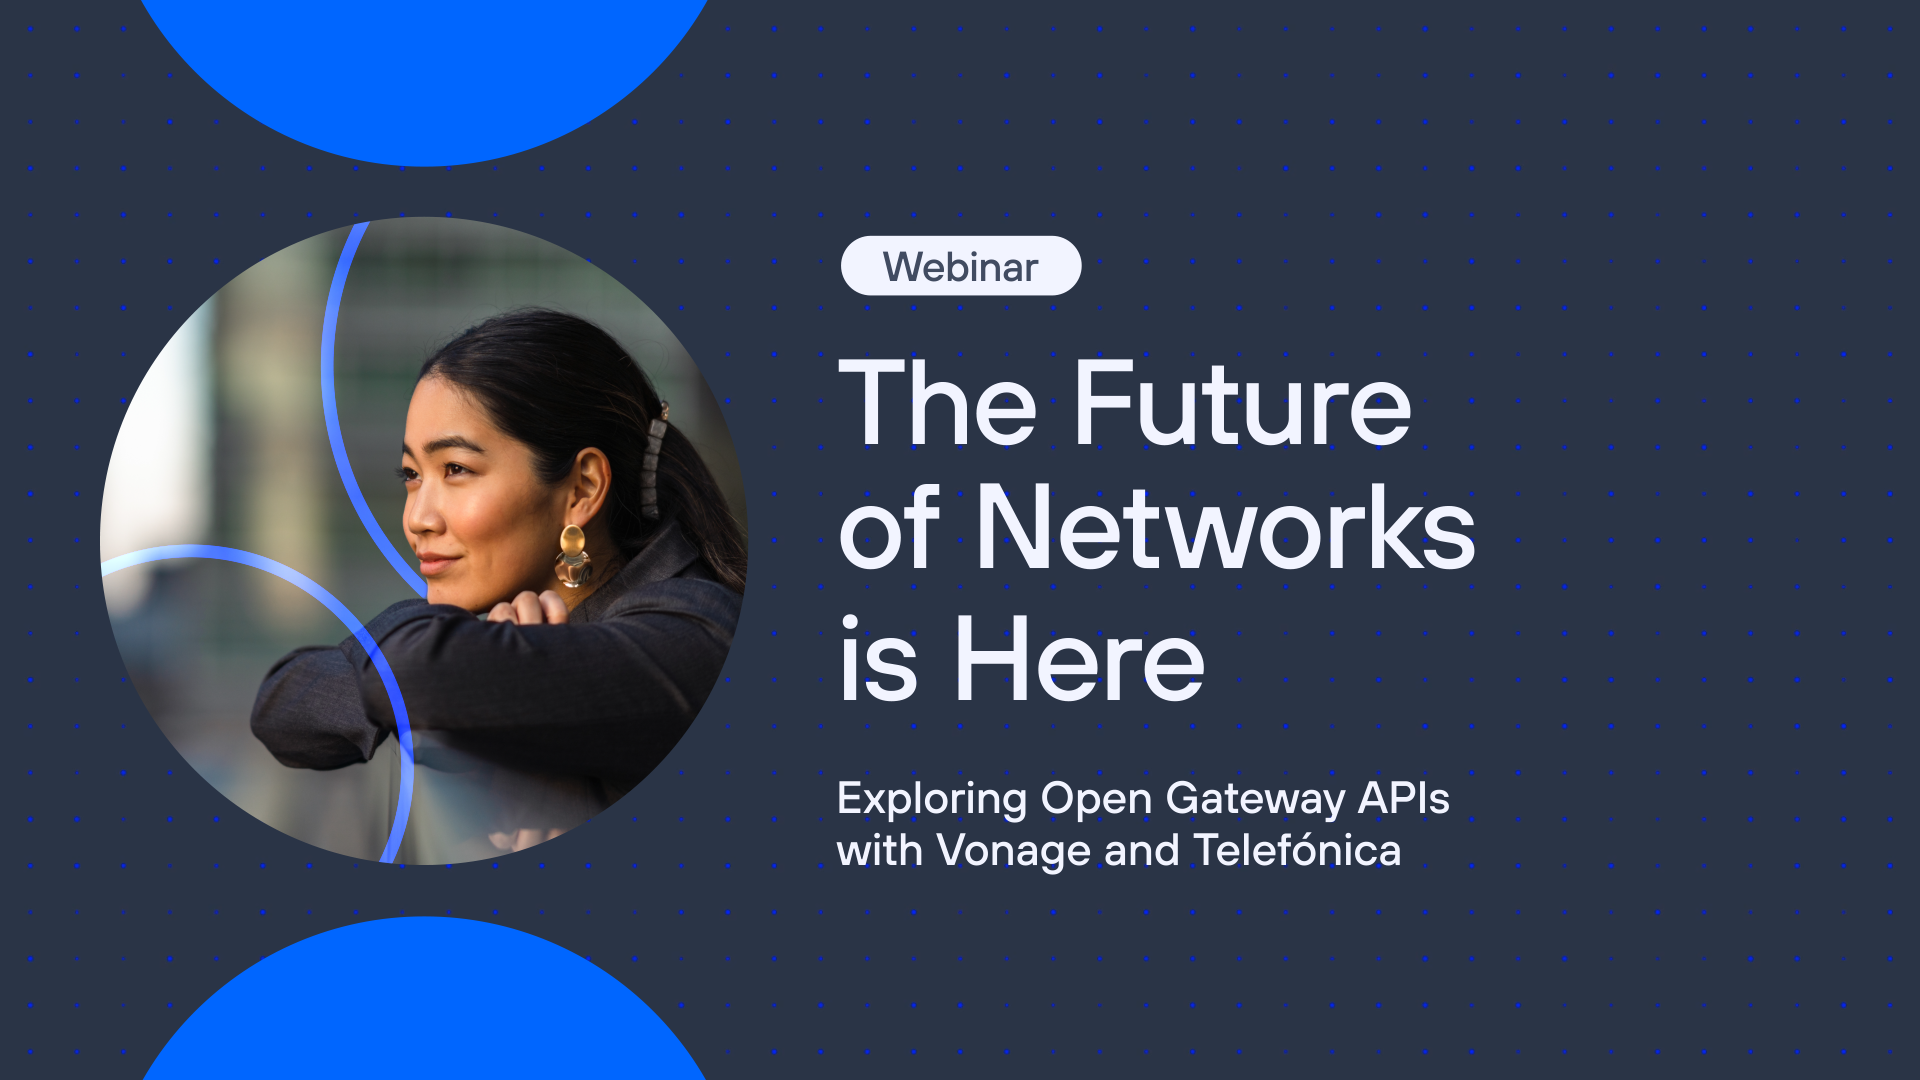 The Future of Networks is Here: Exploring Open Gateway APIs with Vonage and Telefónica.